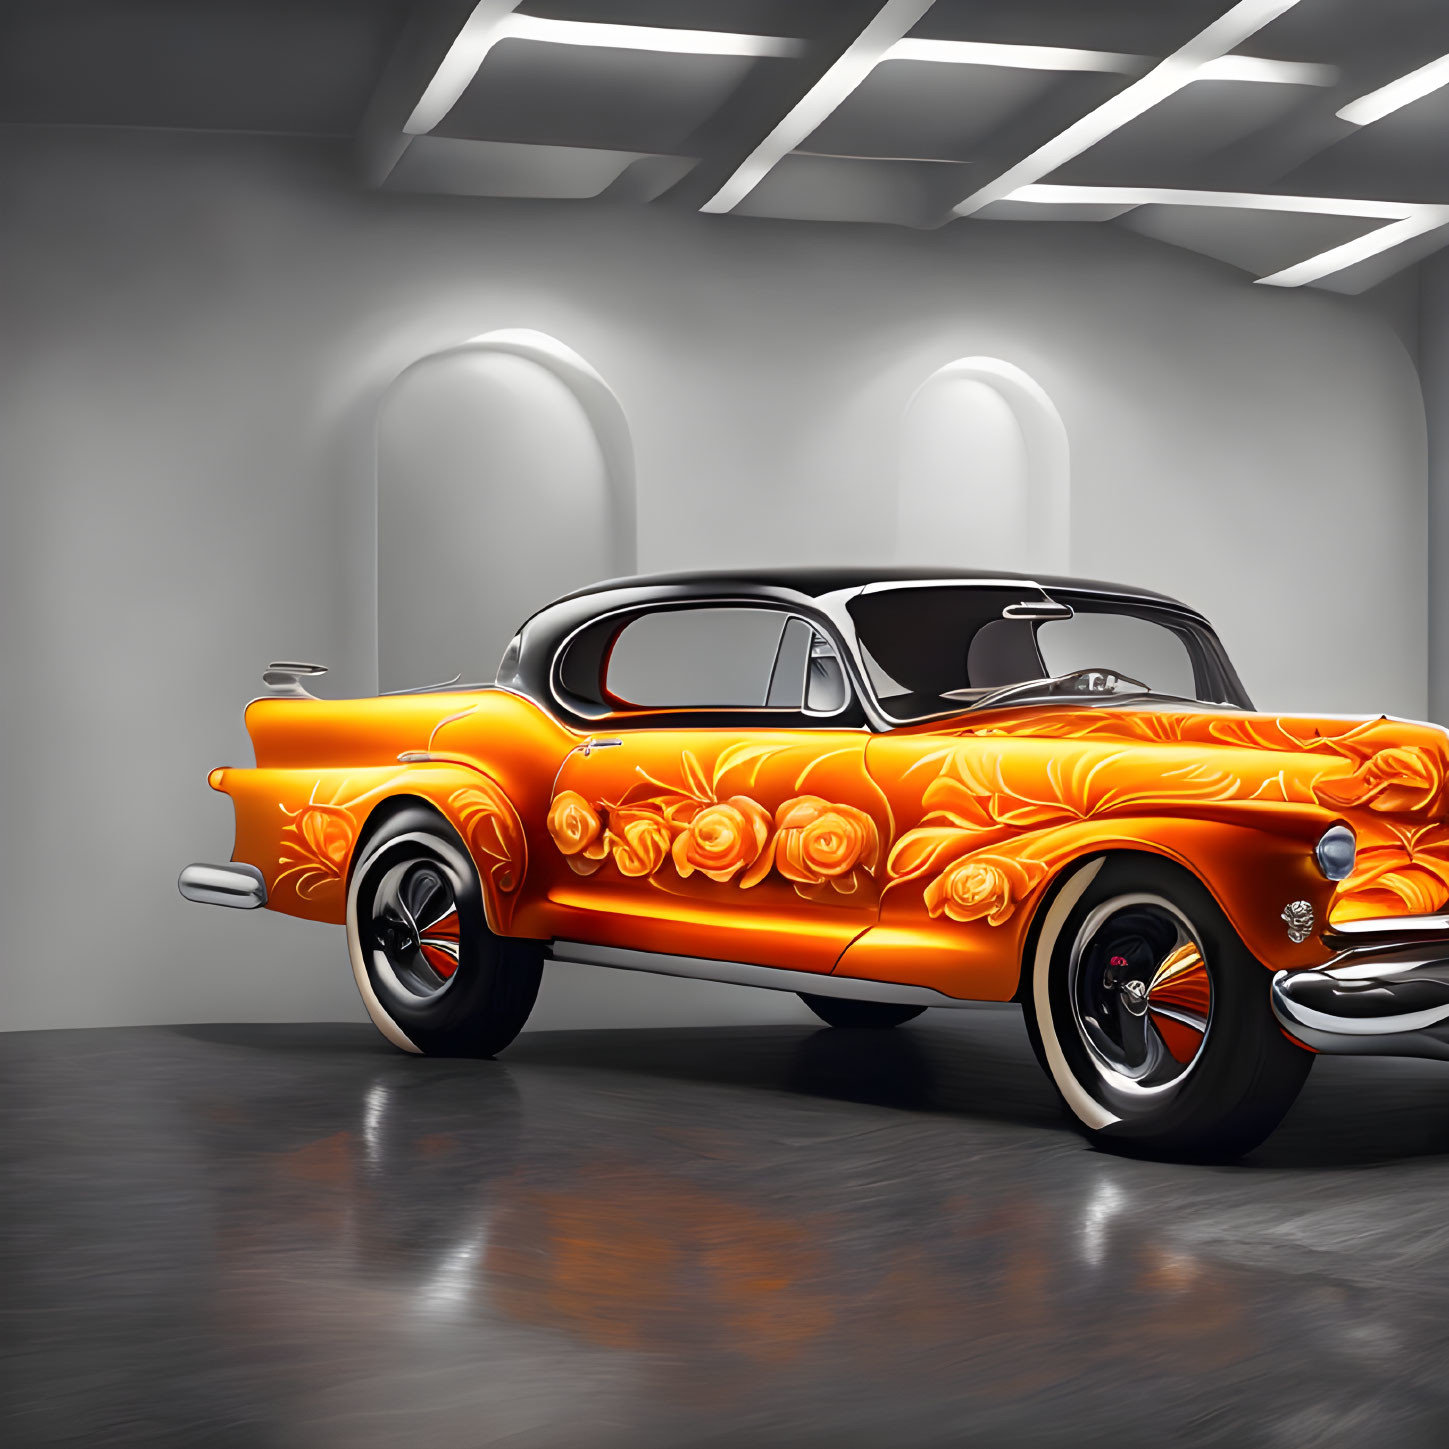 Vintage Orange Car with Flame and Rose Design in Grey Interior